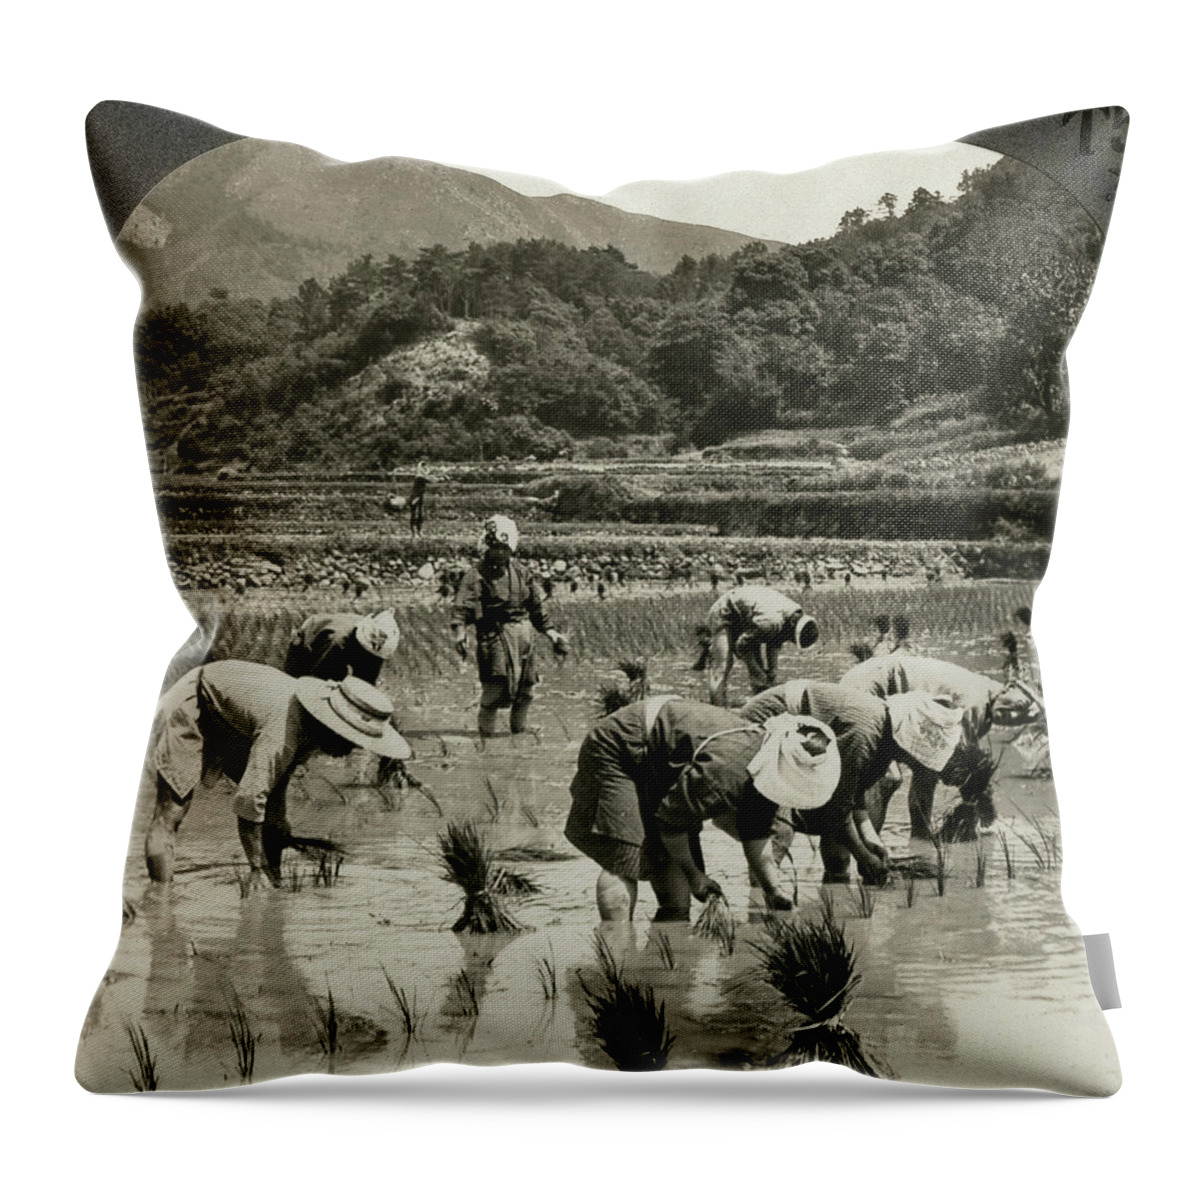 1920 Throw Pillow featuring the photograph Japan Agriculture, C1920 by Granger